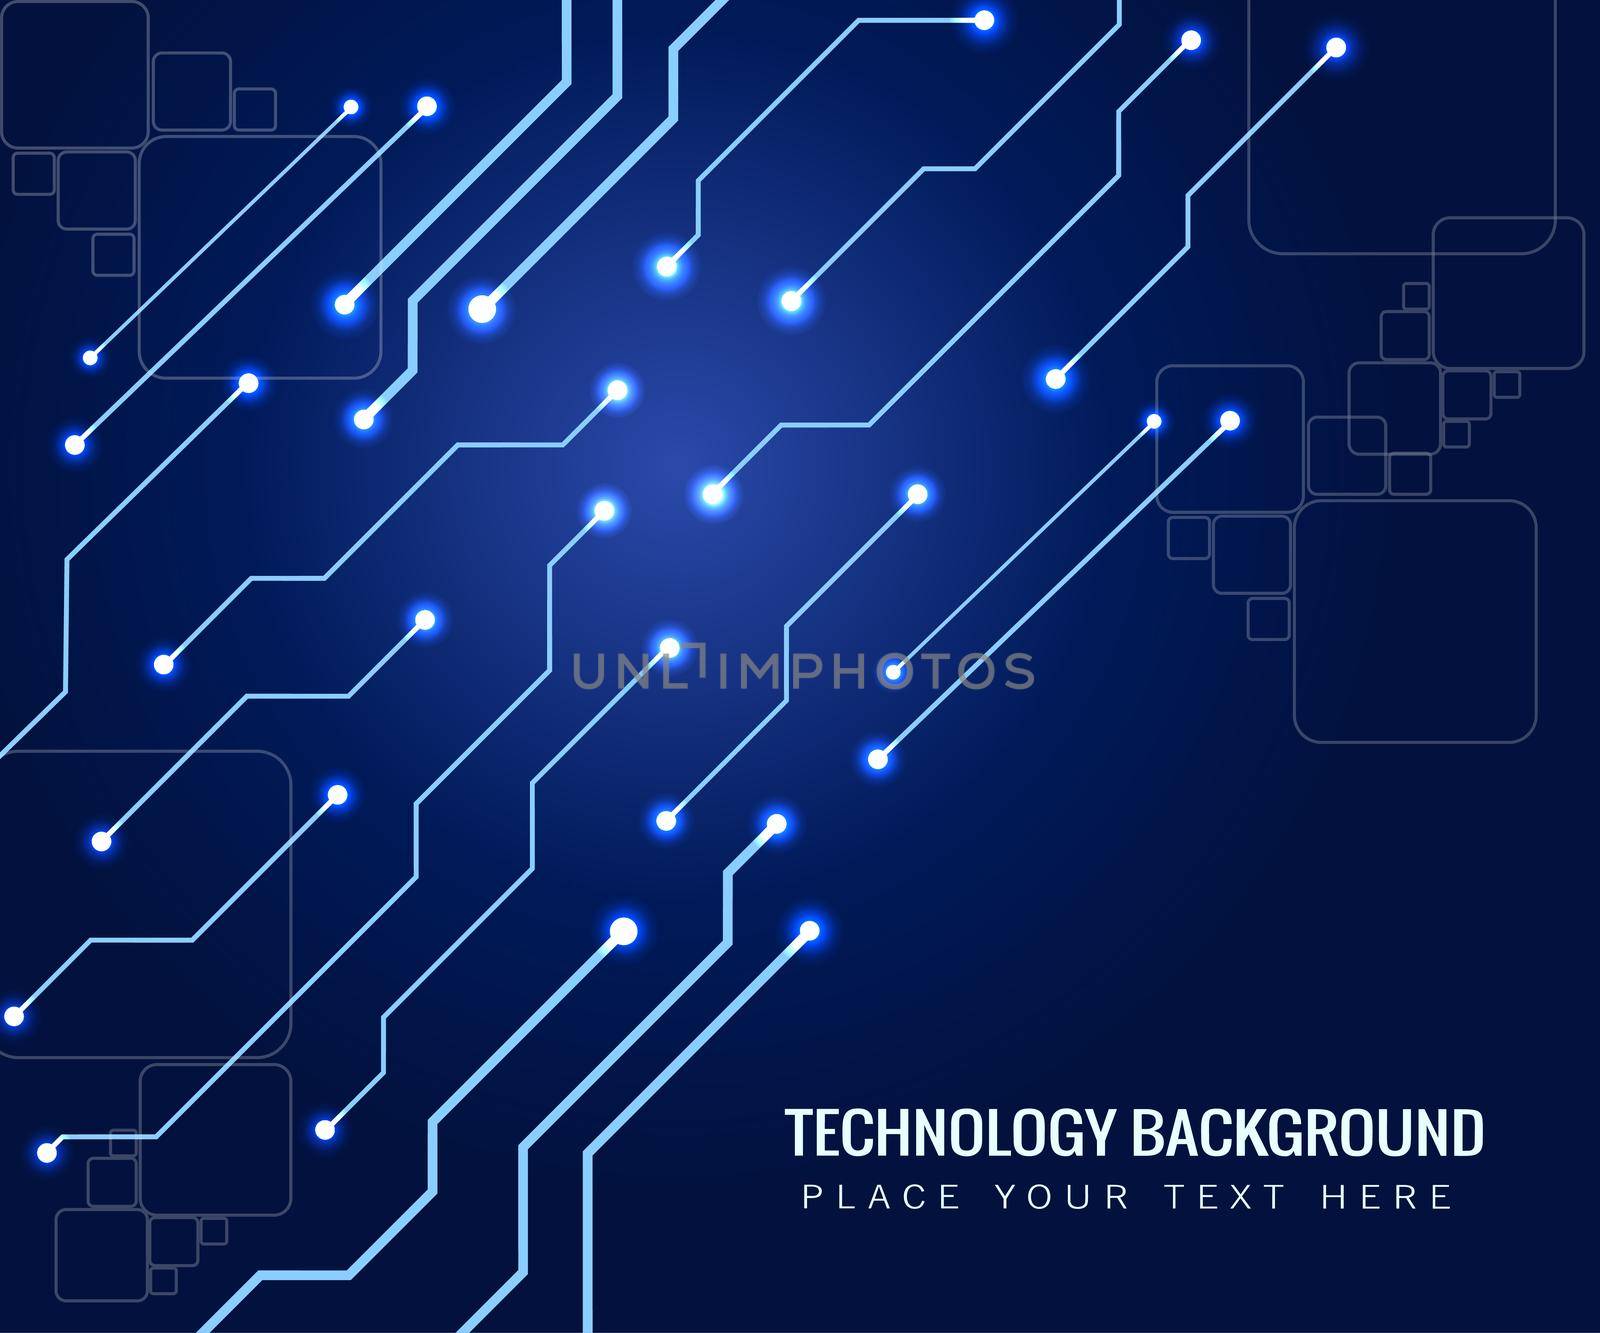 Technology background with circuit board elements. Vector illustration.